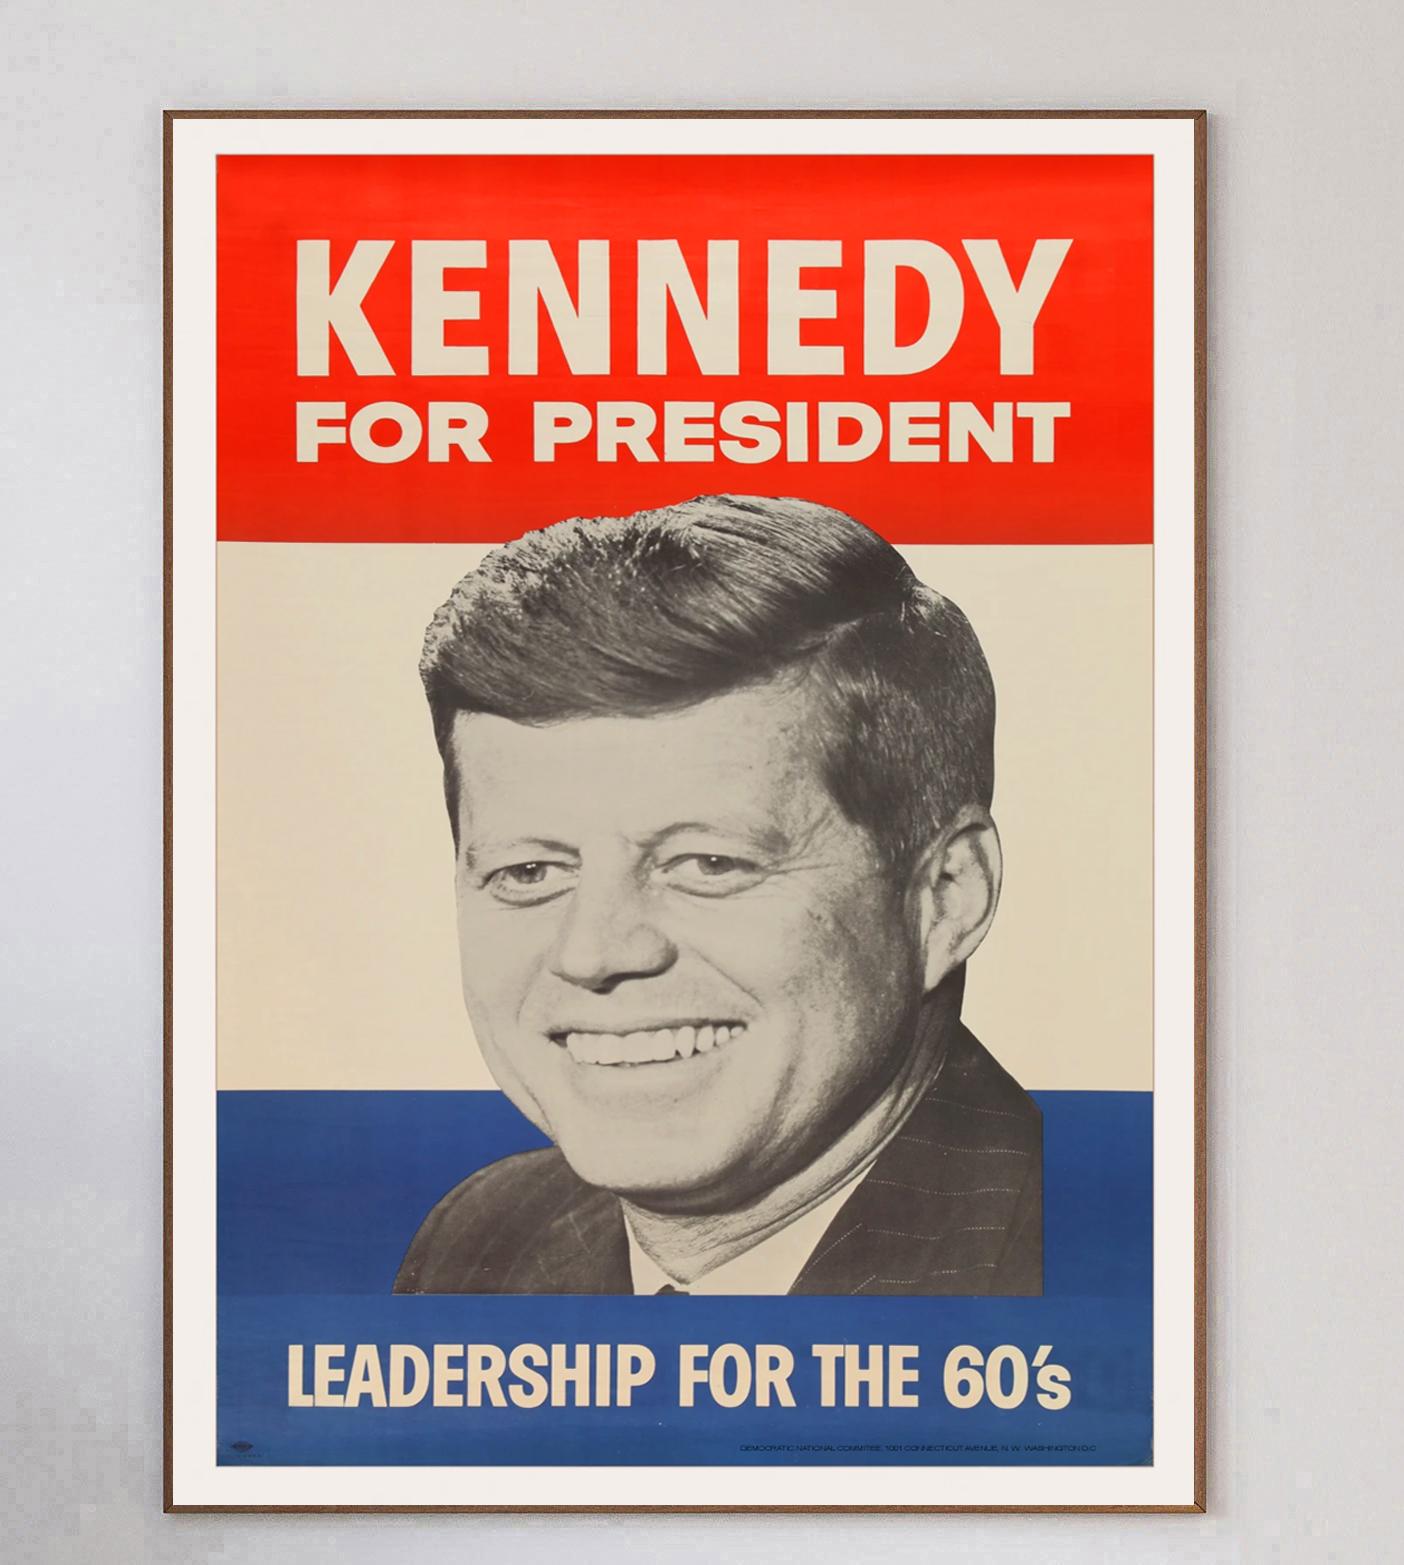 Brilliant poster printed on heavy plastic sheet for John F. Kennedy's presidential campaign in 1960. Reading 